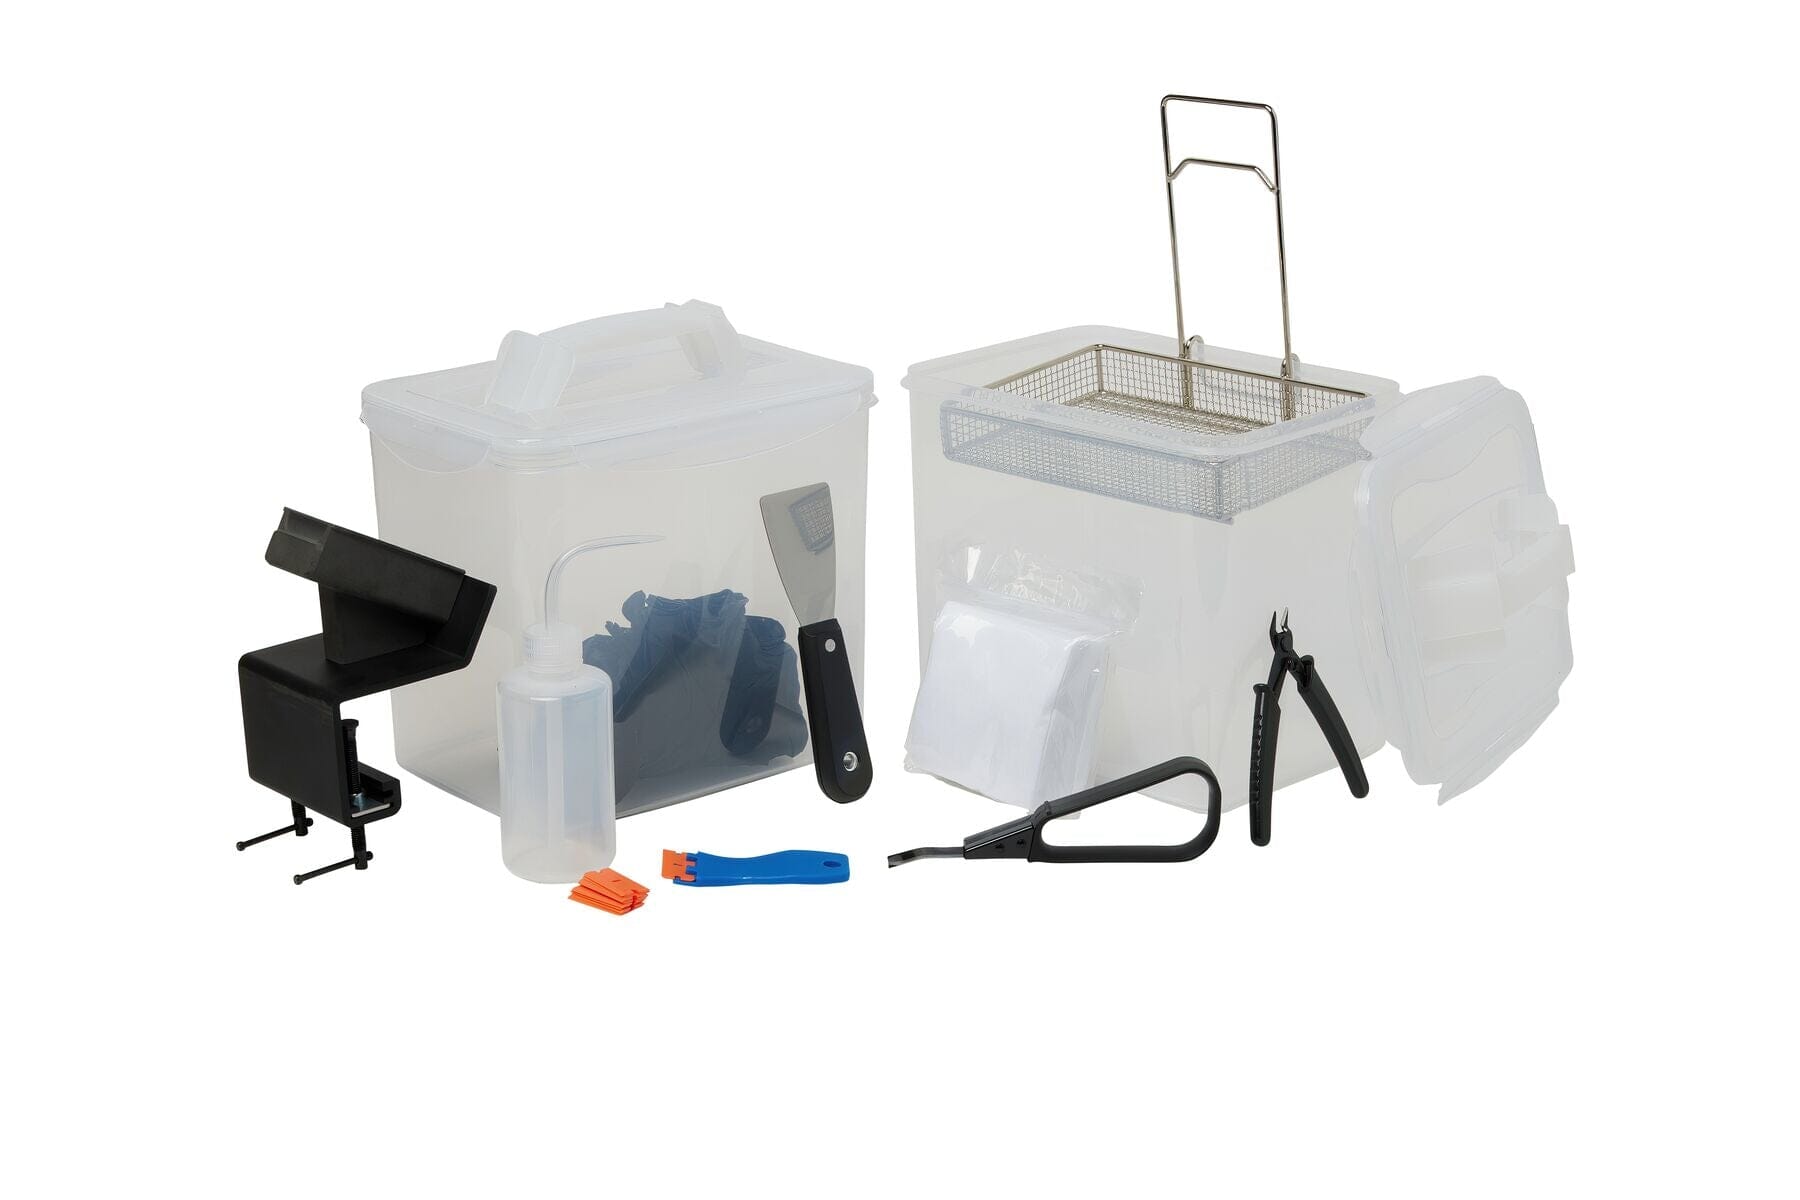 Form 4 Finish Kit - Accessories - Formlabs - Indicate Technologies